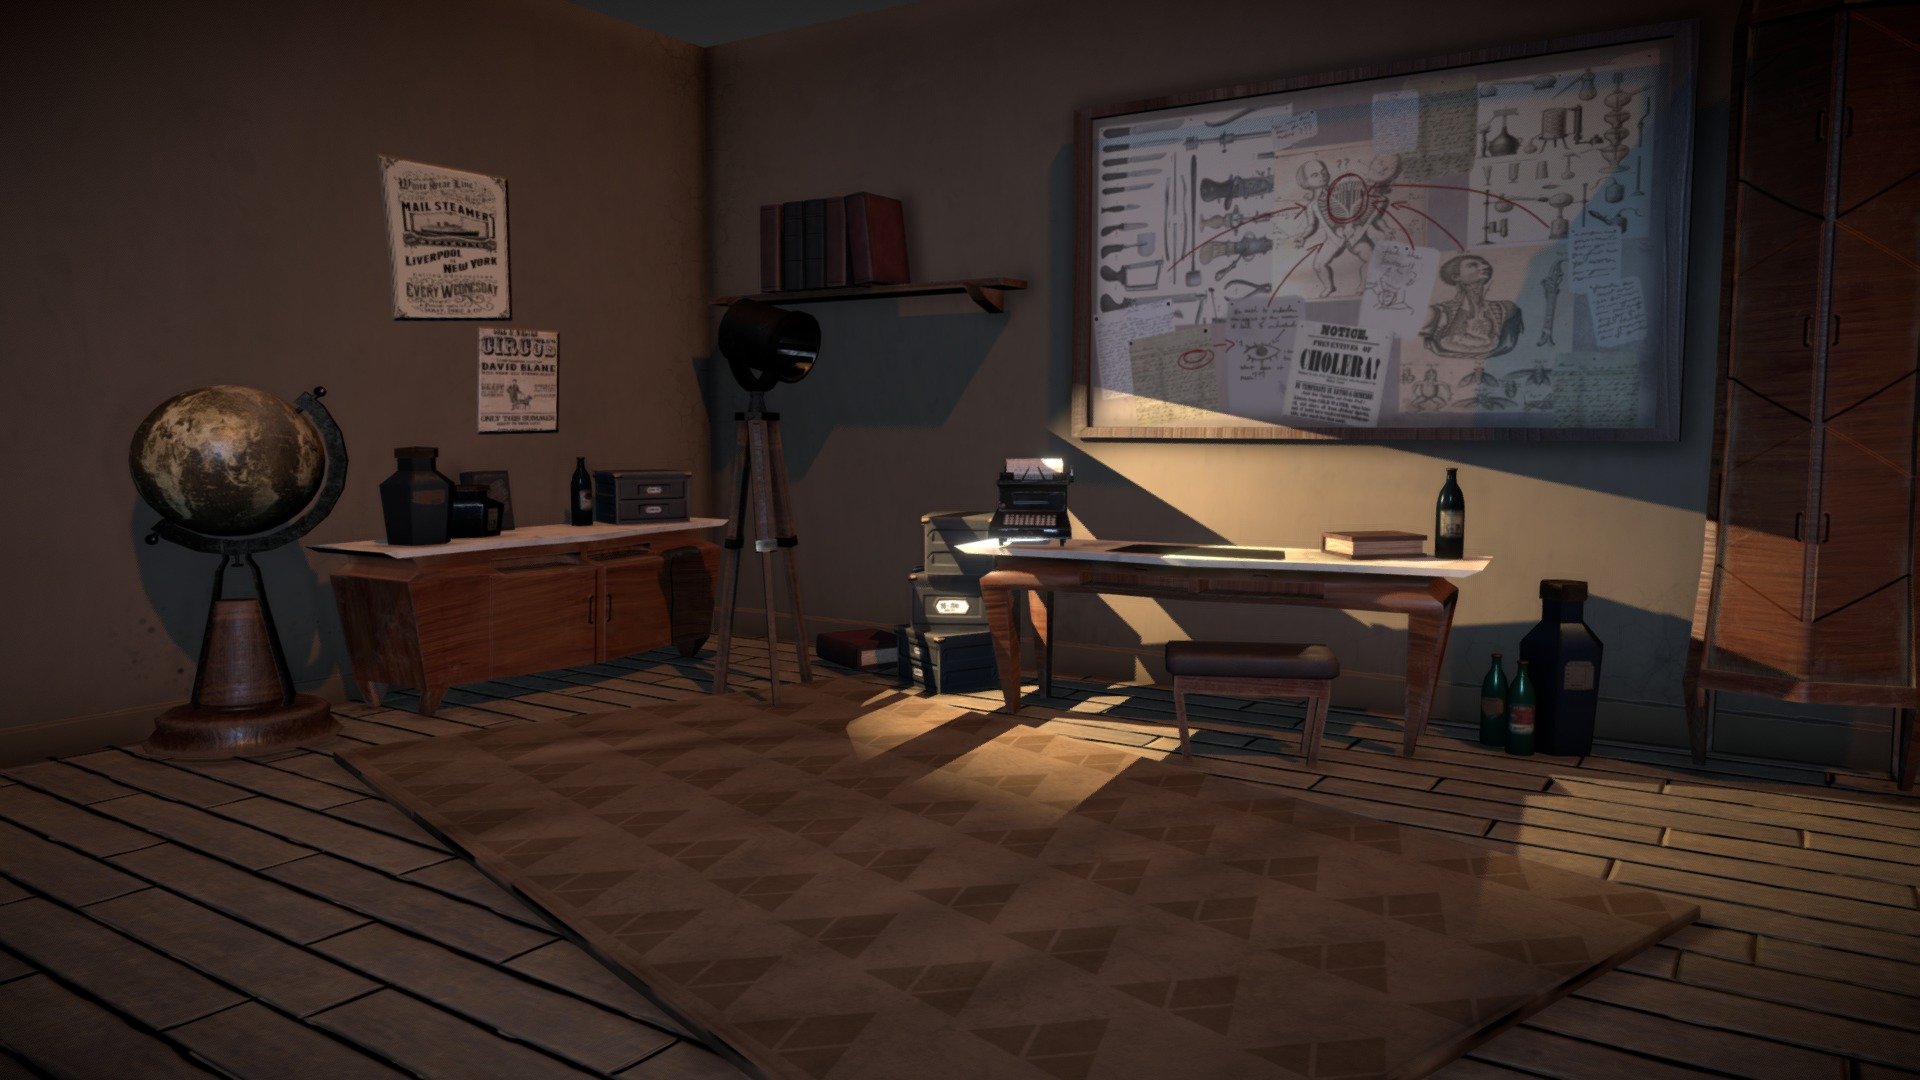 An office made for our second assignment in school, Inspired by Dishonored furniture and style! 
learnt a lot about maya, texturing and patience.
Made using Maya and Substance painter 3d model